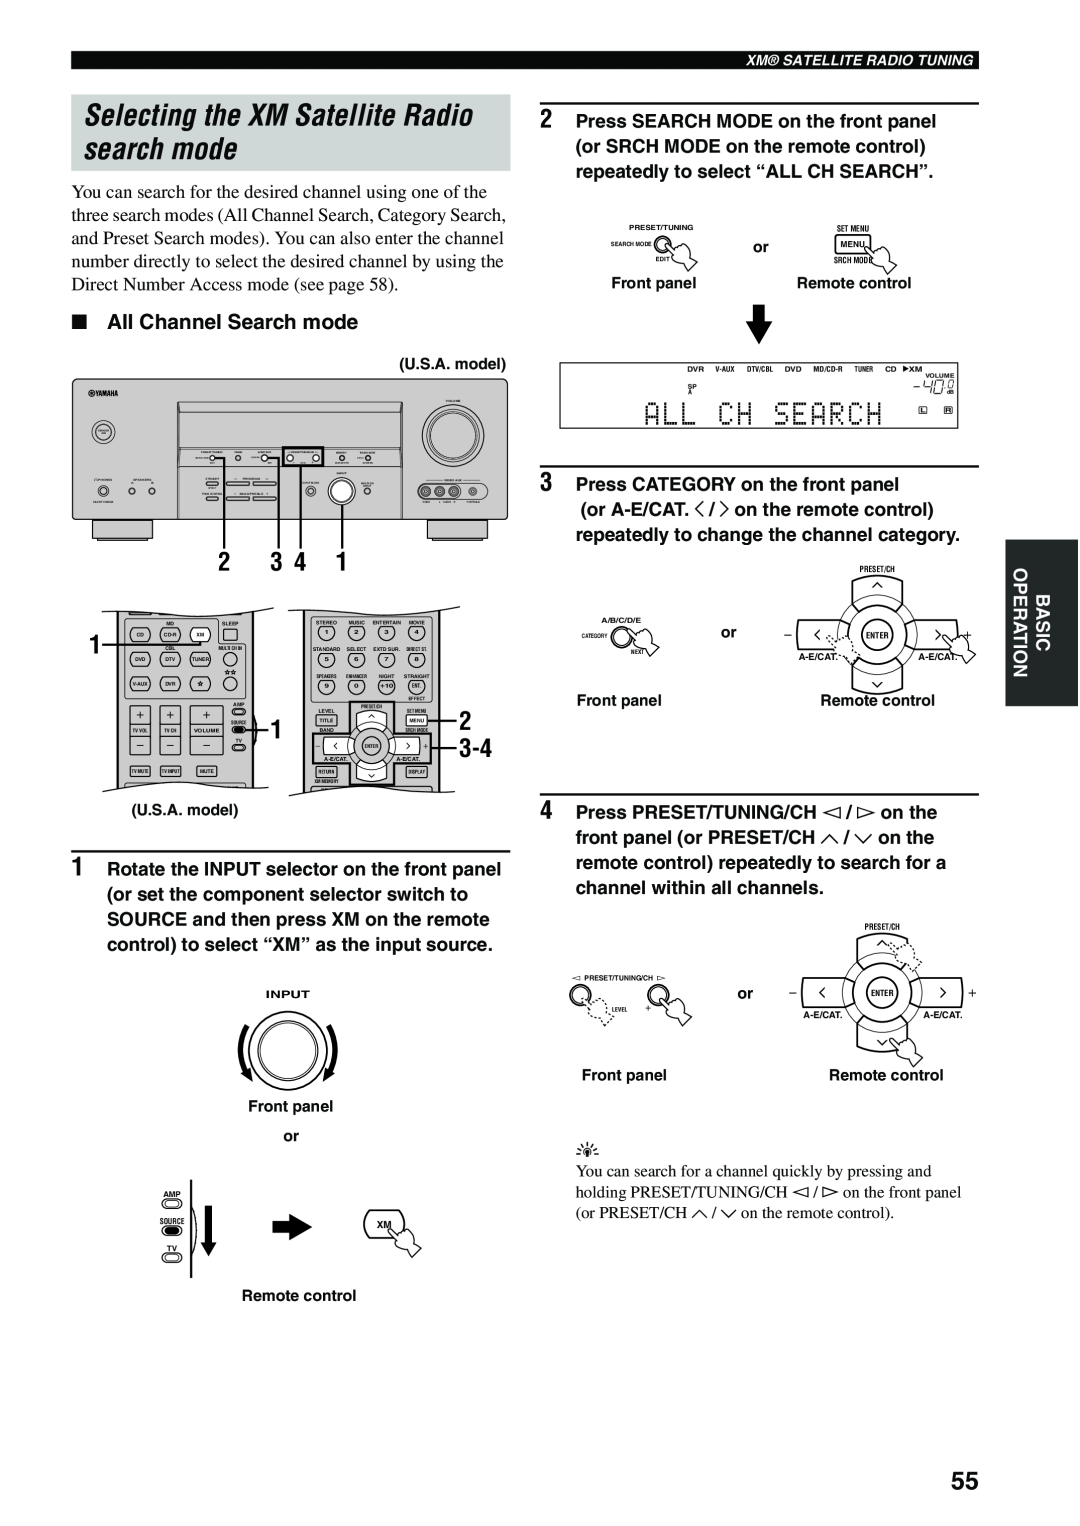 Yamaha HTR-5940 owner manual Selecting the XM Satellite Radio search mode, 2 3 4, All Channel Search mode 